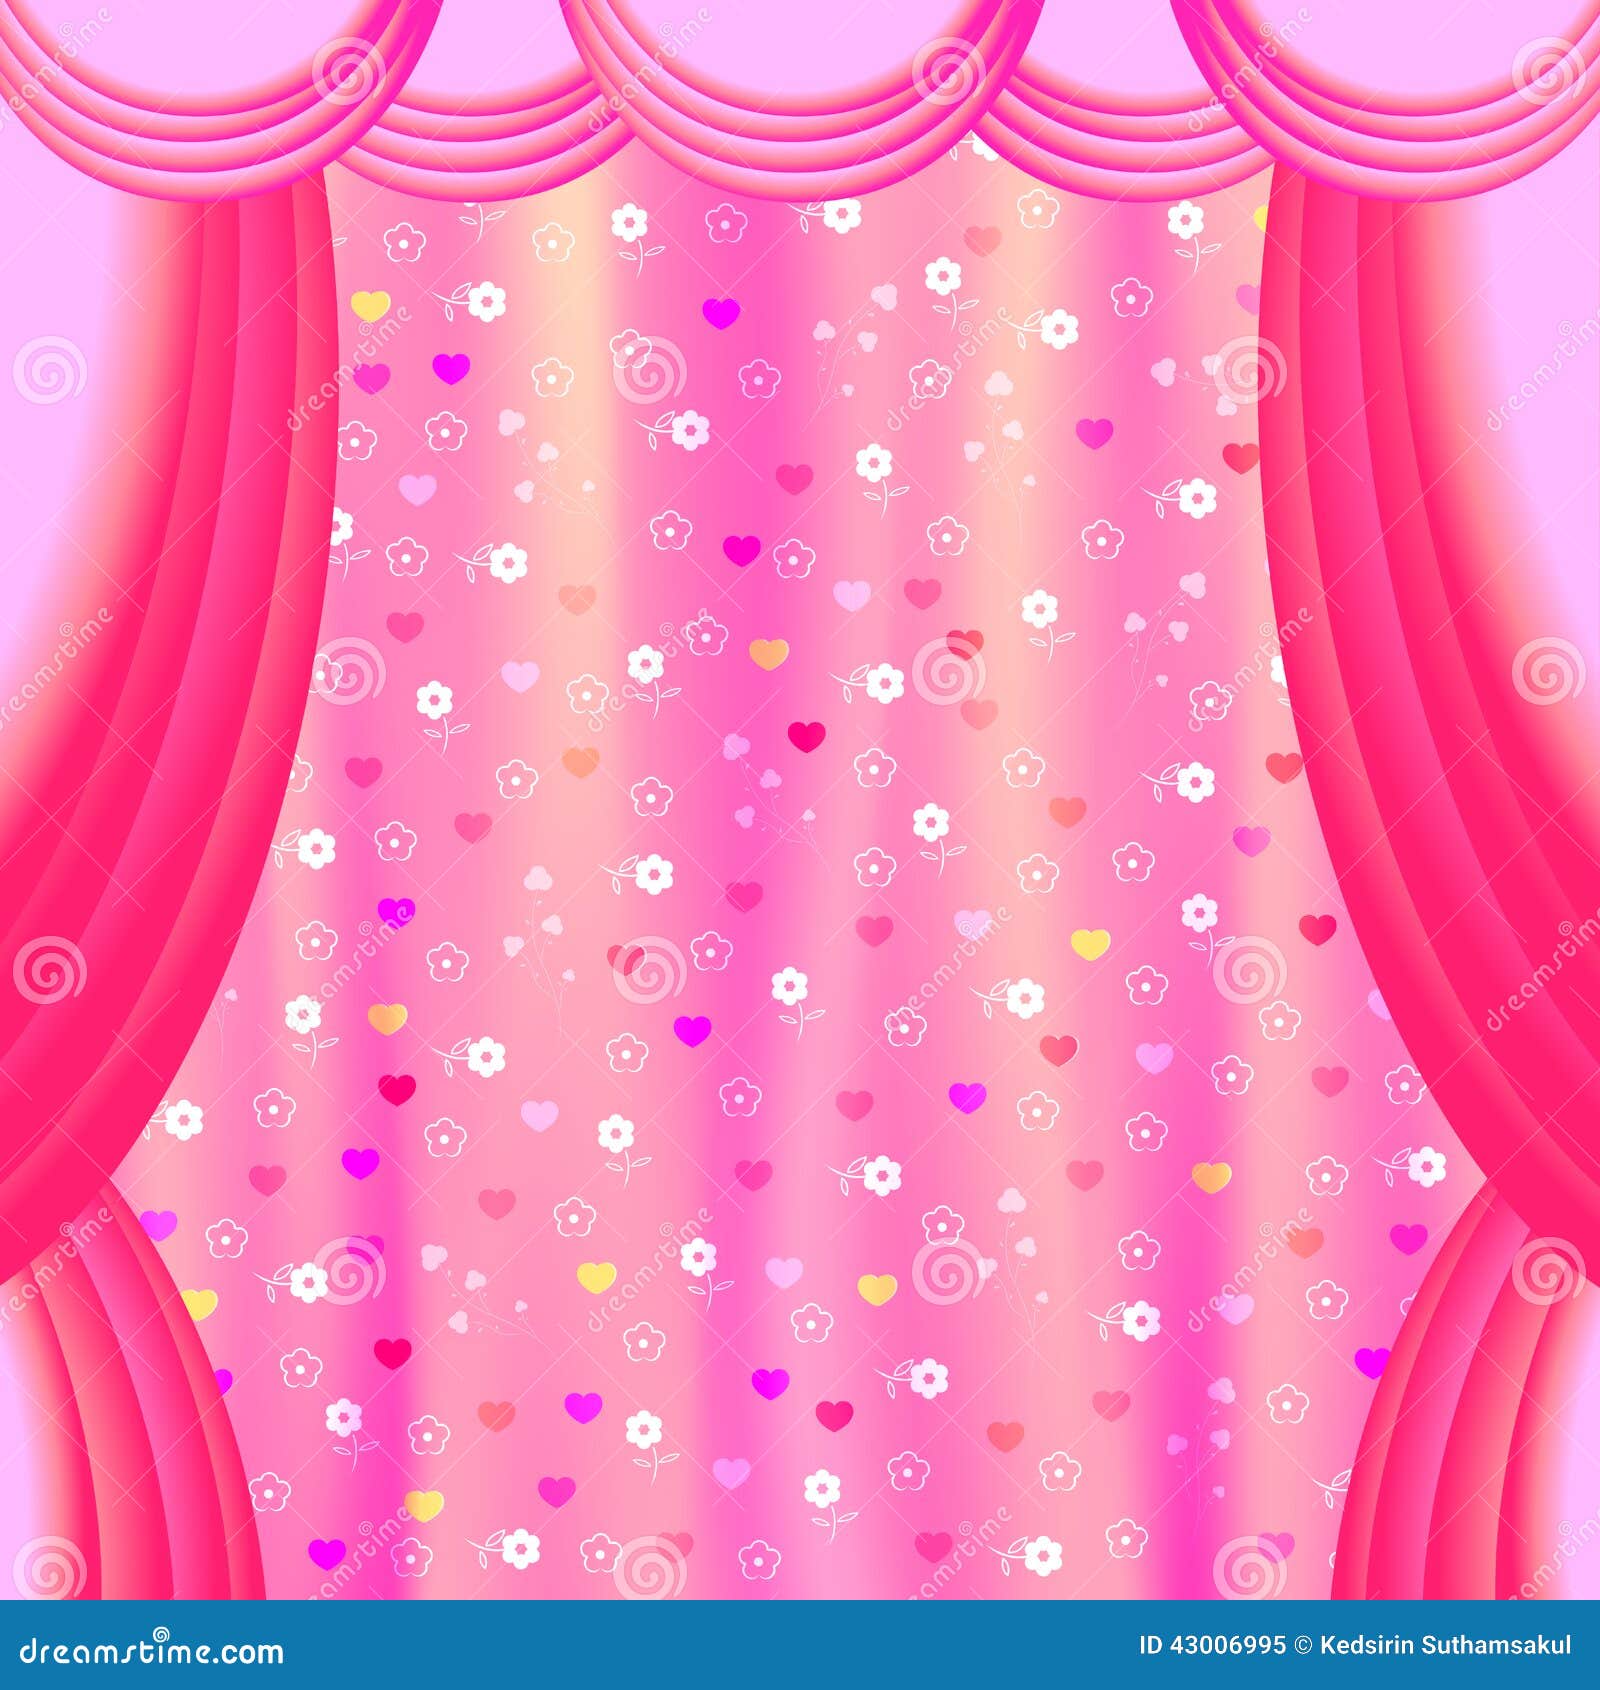 White Of Cute Flower On Pink Stage Curtain Vector Stock Vector